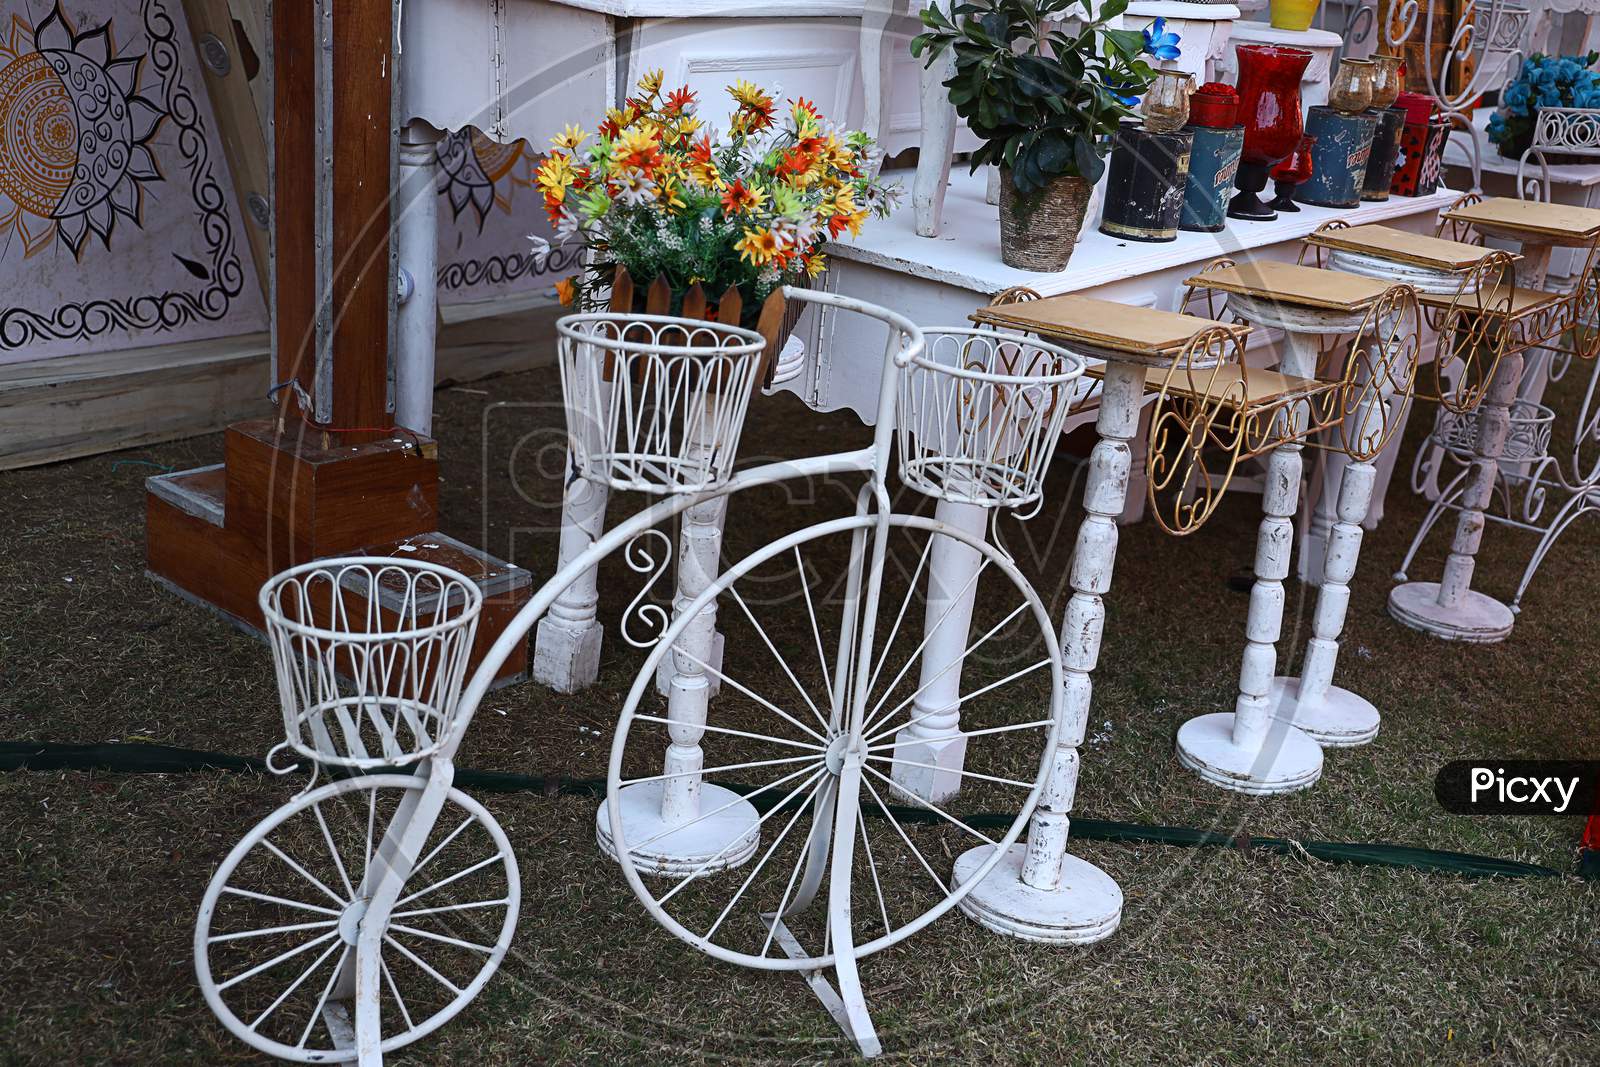 Decorative Vintage Old Model Bicycle With Vases For Flowers On A Grassland, Outdoor Decorated Background, Wedding Event Decor Concept